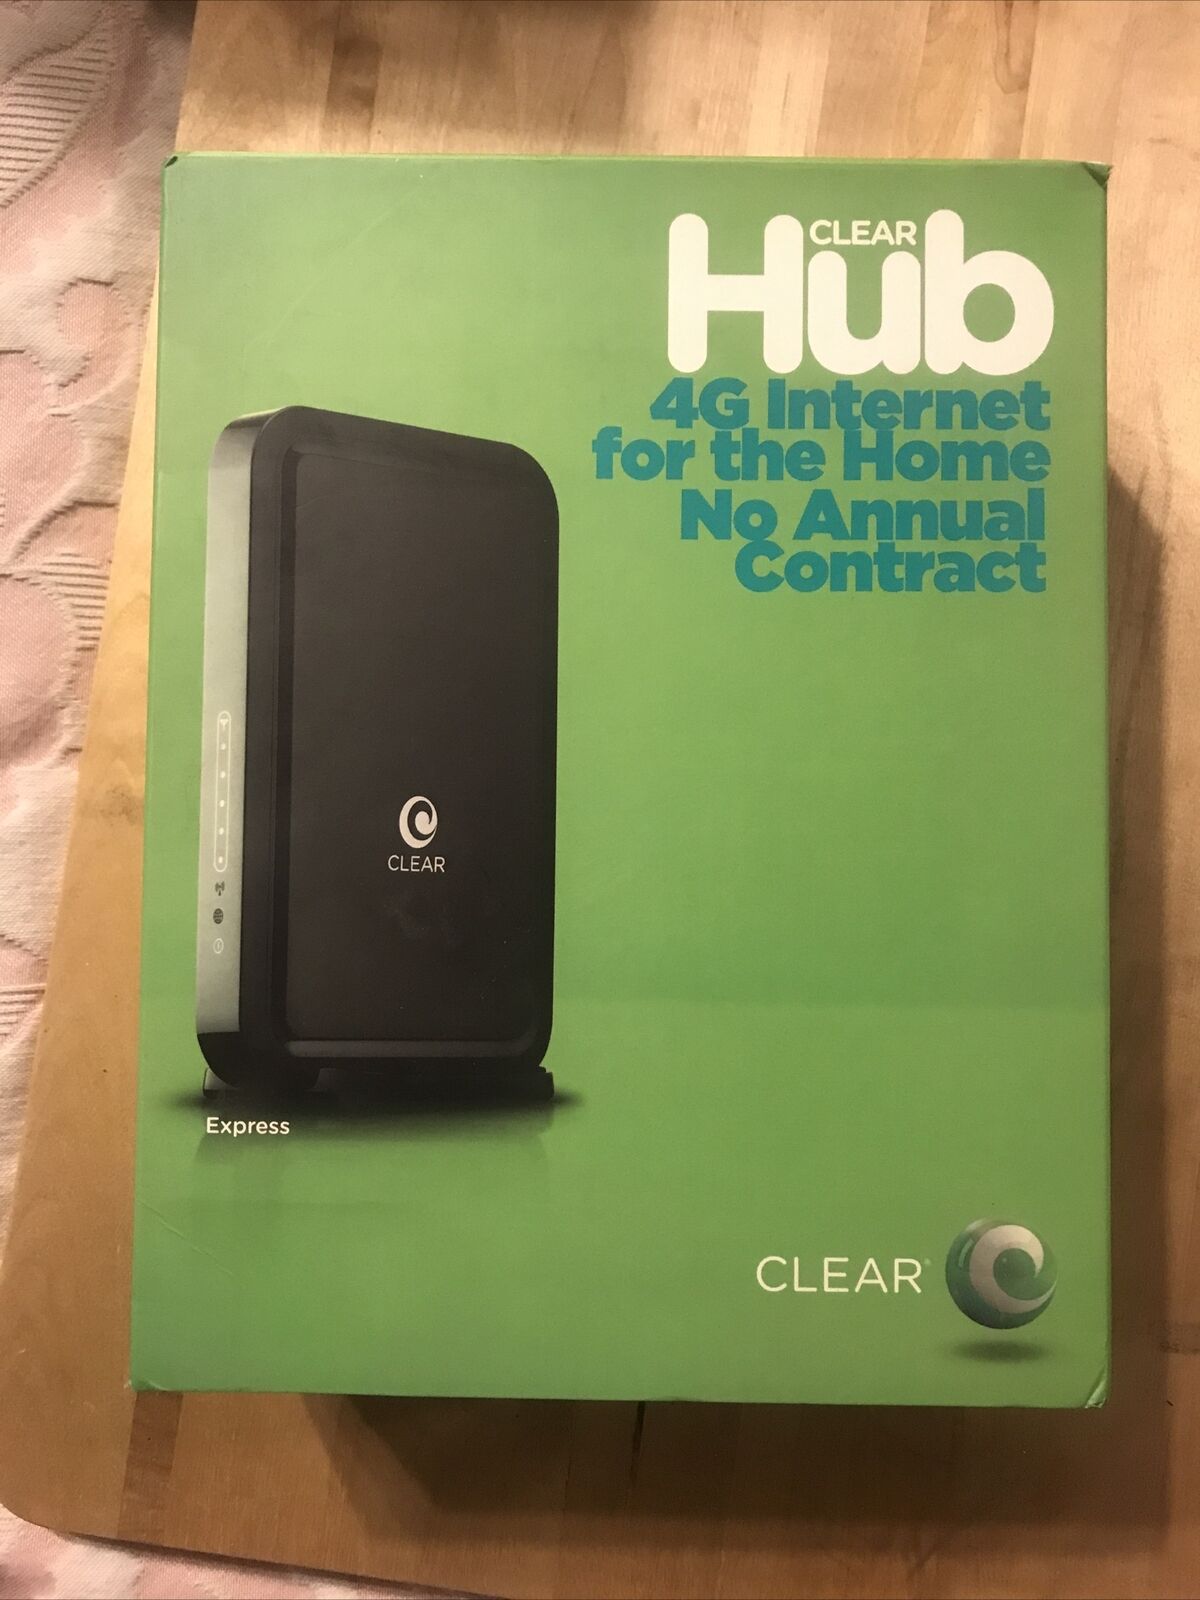 UPGRADE/REPLACE CLEAR 4G Modem! Clearwire HUB EXPRESS WiFi WIXFBR-131.